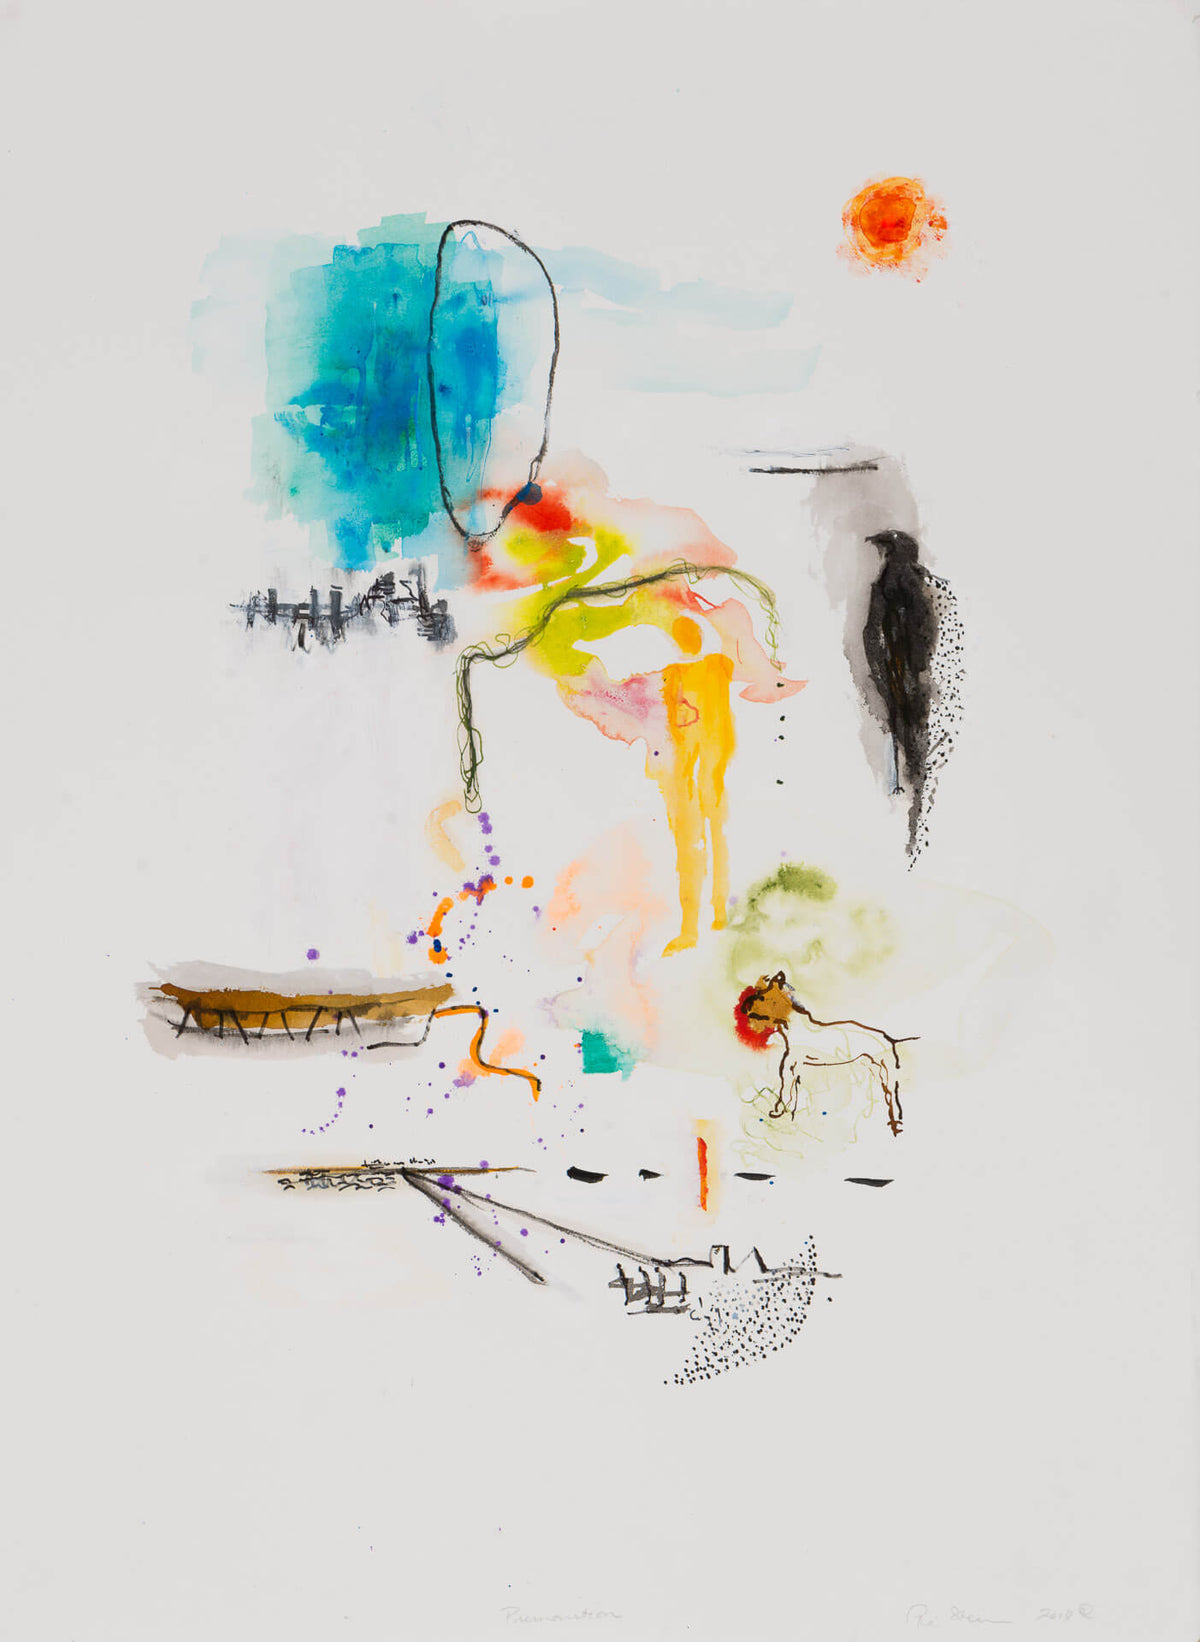 Contemporary Expressive Art with color play, gestural organic lines leads to a conversation